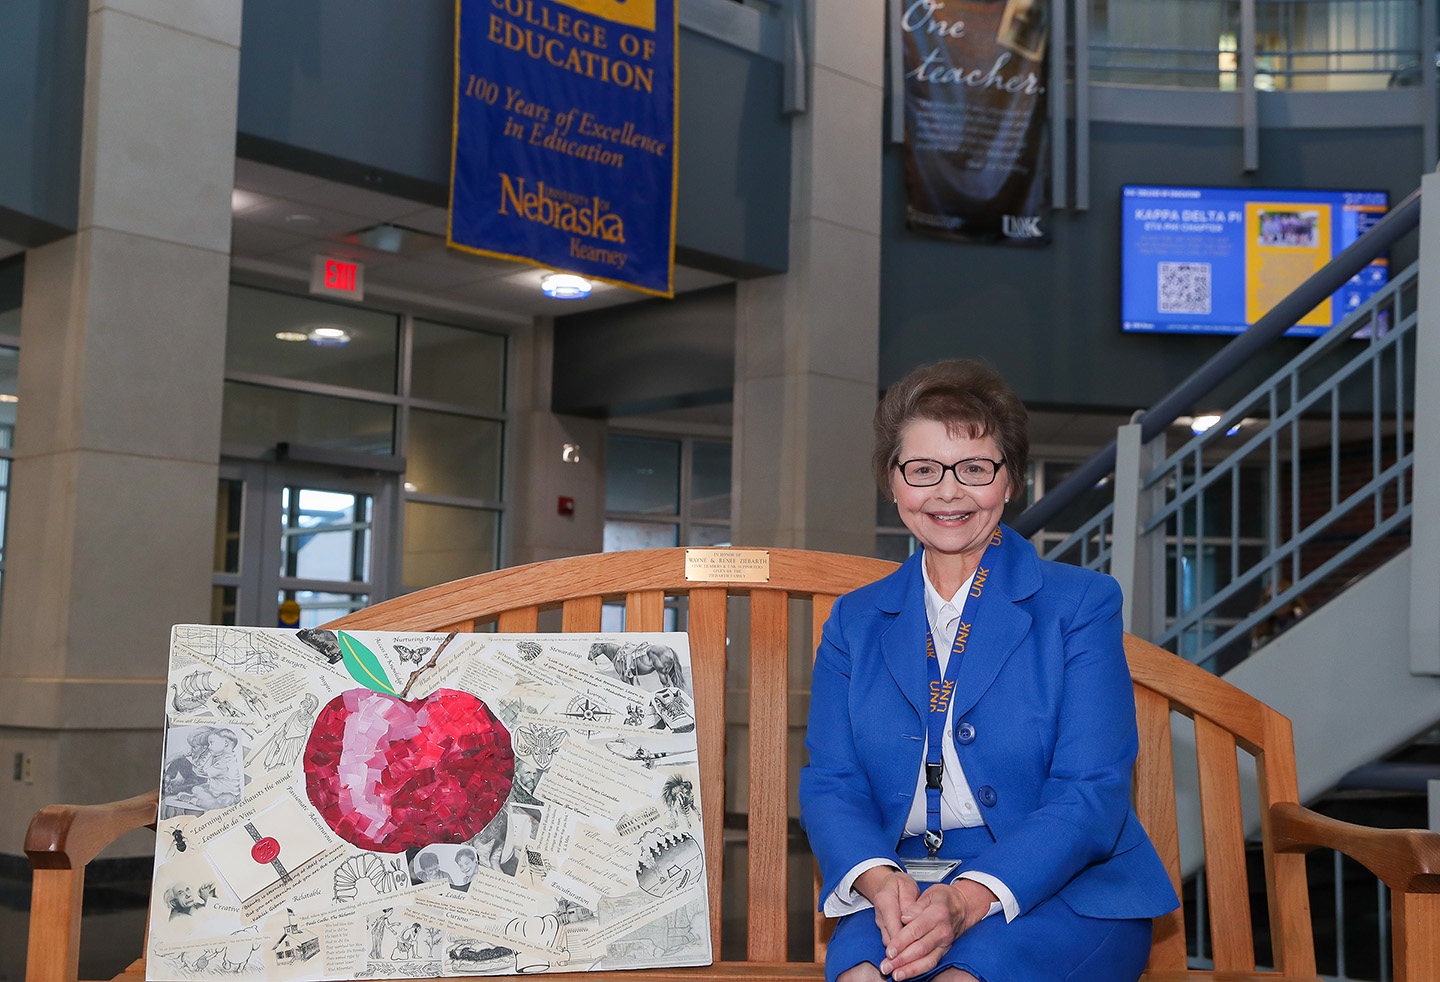 UNK professor of teacher education Jane Ziebarth-Bovill retired last month after a nearly 40-year career in higher education. She’s pictured inside the College of Education building, on a bench that honors her late parents, Wayne and Renee Ziebarth. (Photo by Erika Pritchard, UNK Communications)